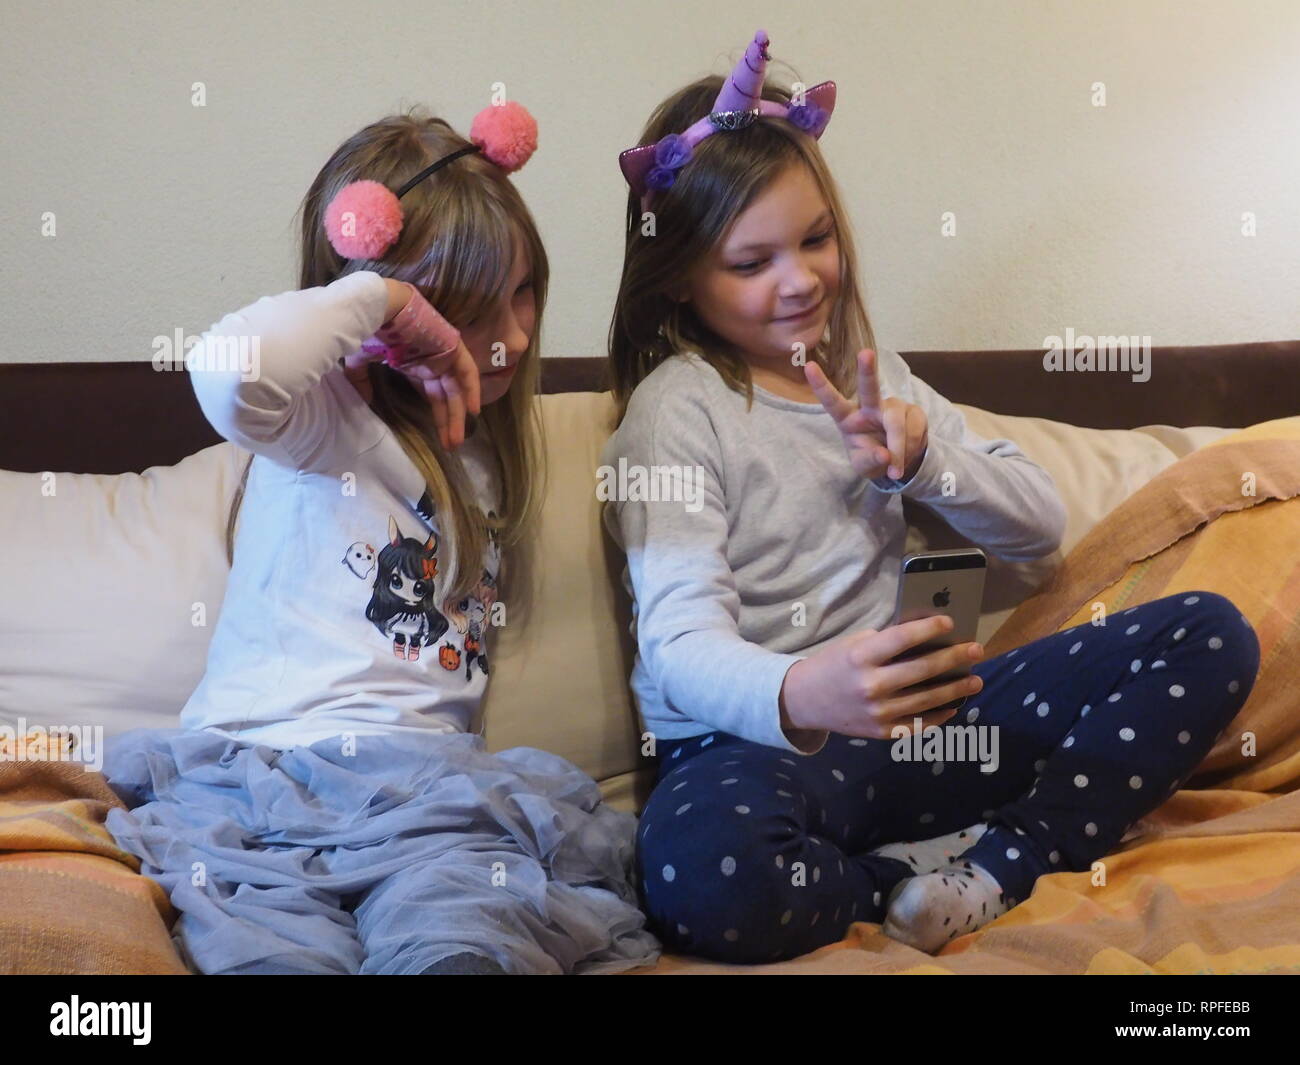 Warsaw, Poland. 16th Feb, 2019. Polish tiktokers Nadia and Zosia record a short video for Tiktok by using their parents' phone in Warsaw, Poland, Feb. 16, 2019. Credit: Shi Zhongyu/Xinhua/Alamy Live News Stock Photo